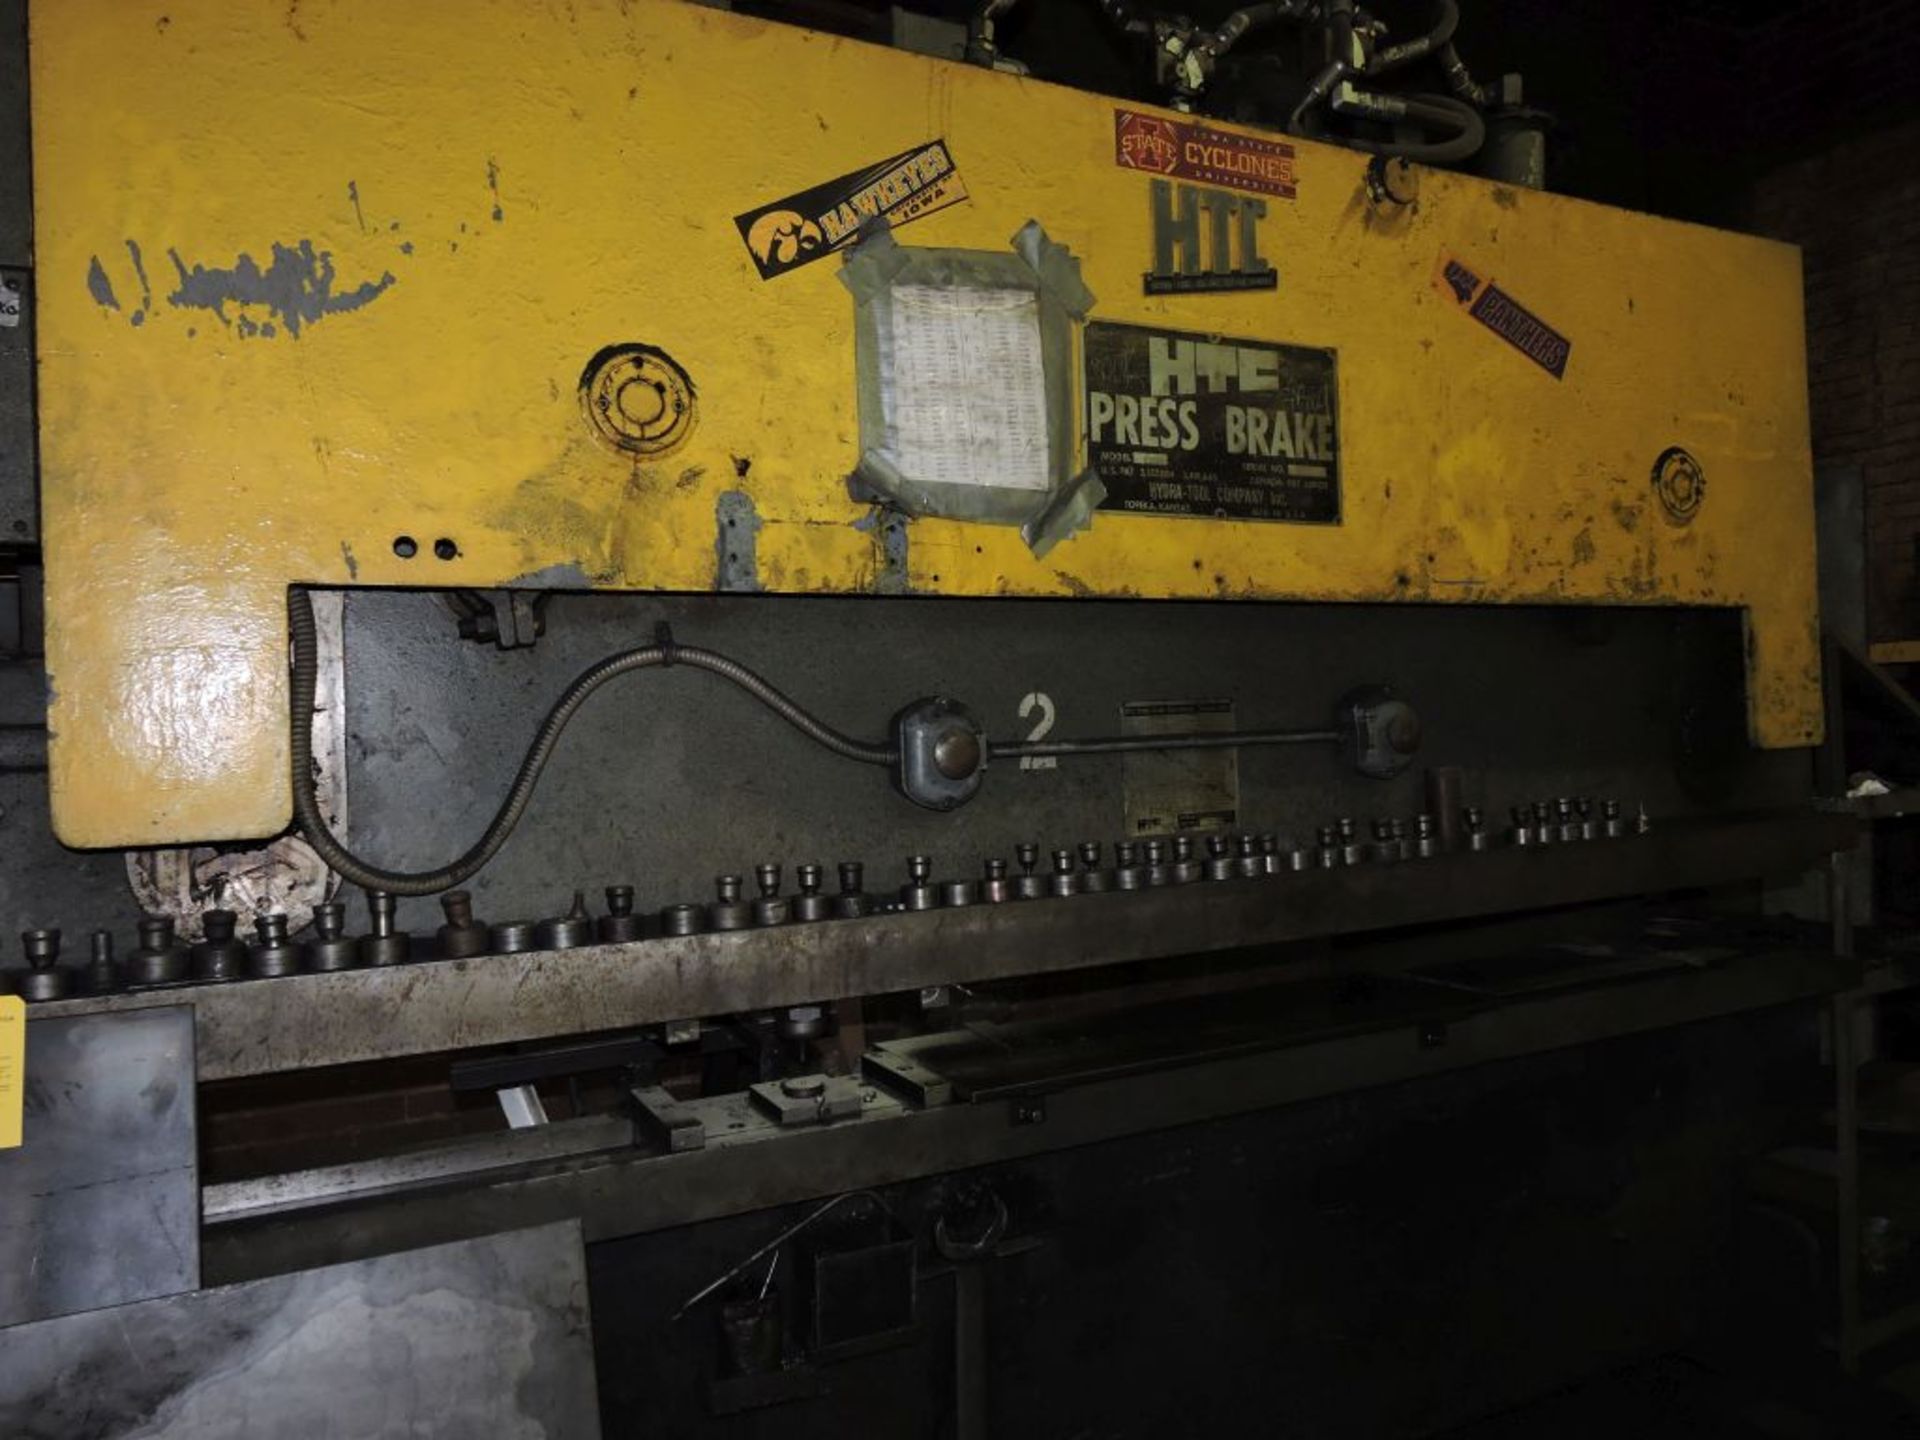 HTC hydraulic punch press, model 830GS, 130 T., 9' 7", 150 punches.